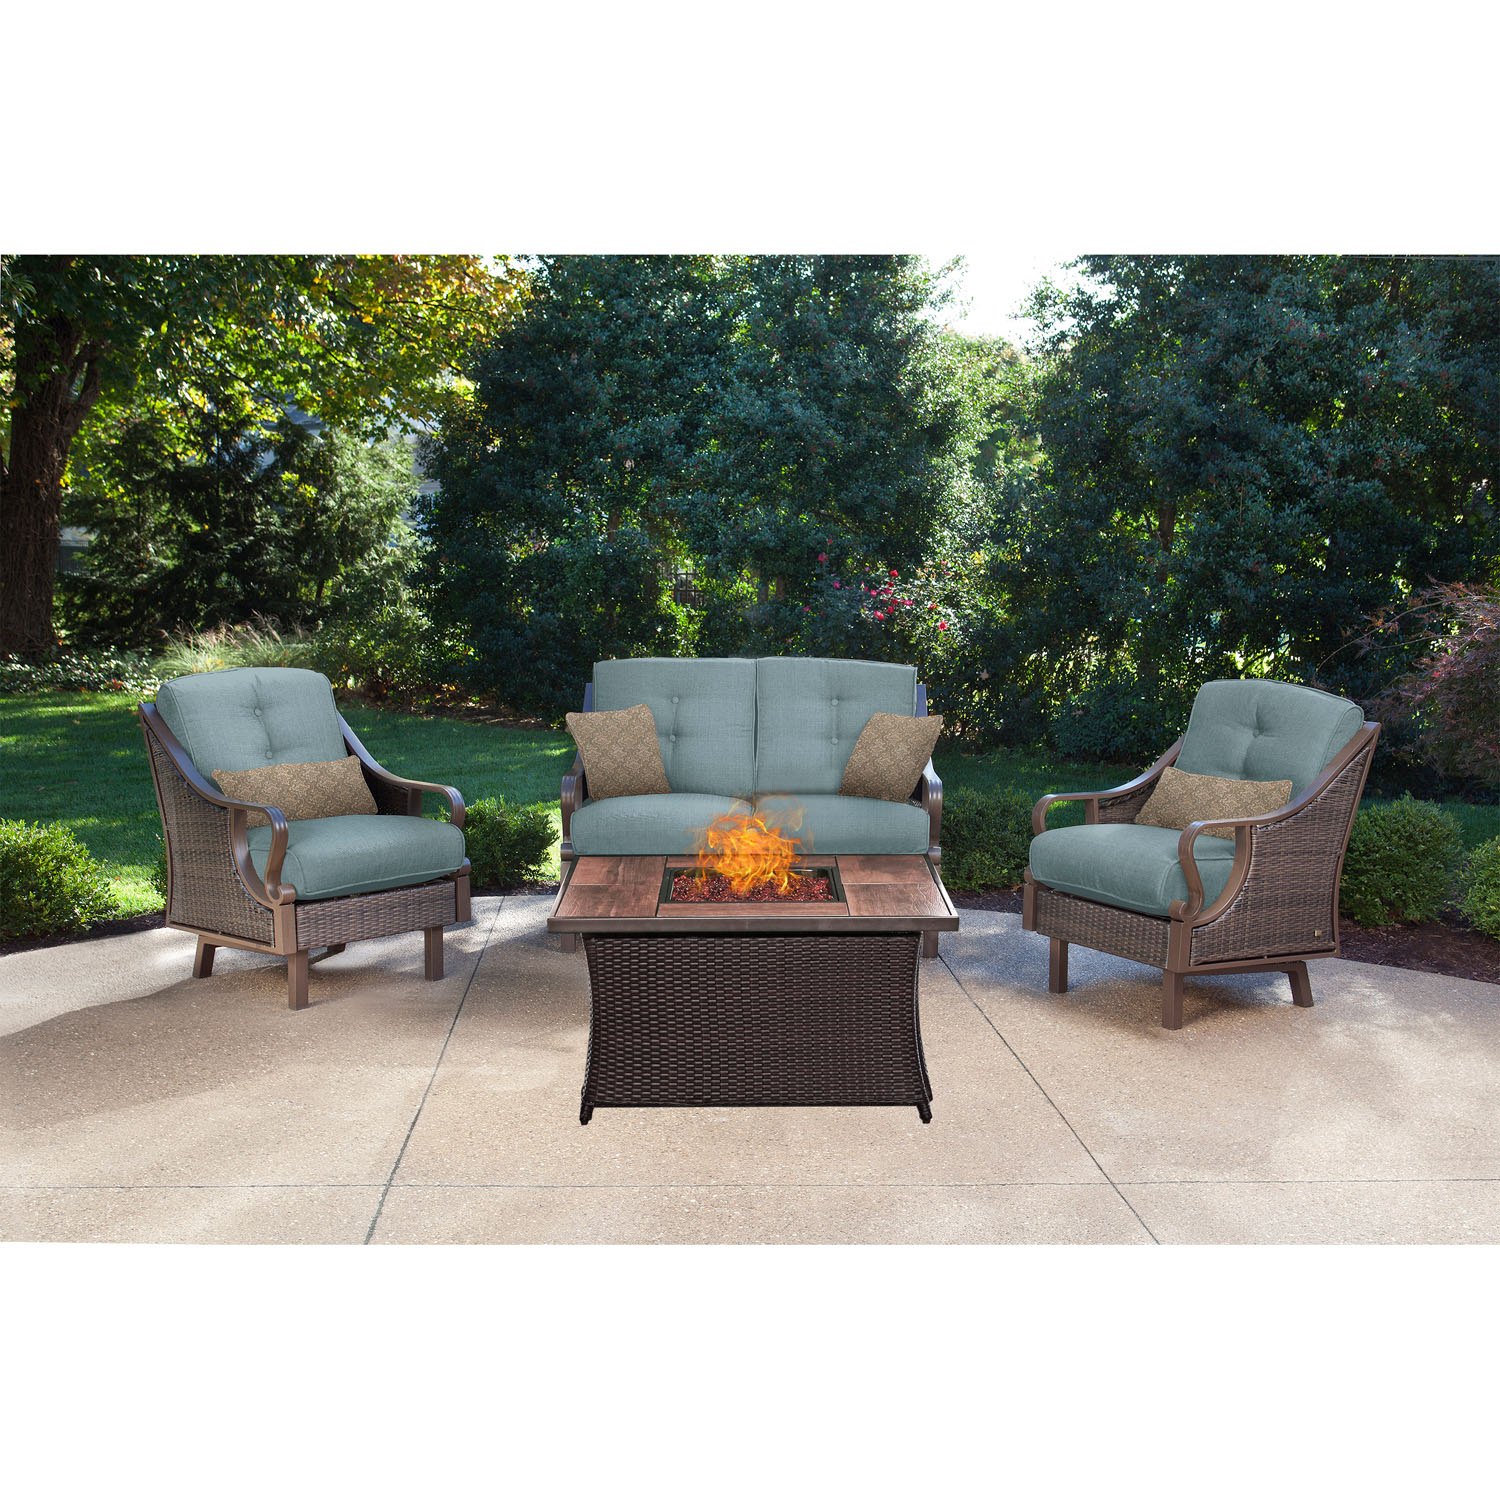 Hanover Ventura 4 Pcs Wicker and Steel Propane Fire Pit Chat Set, Ocean Blue - image 1 of 11